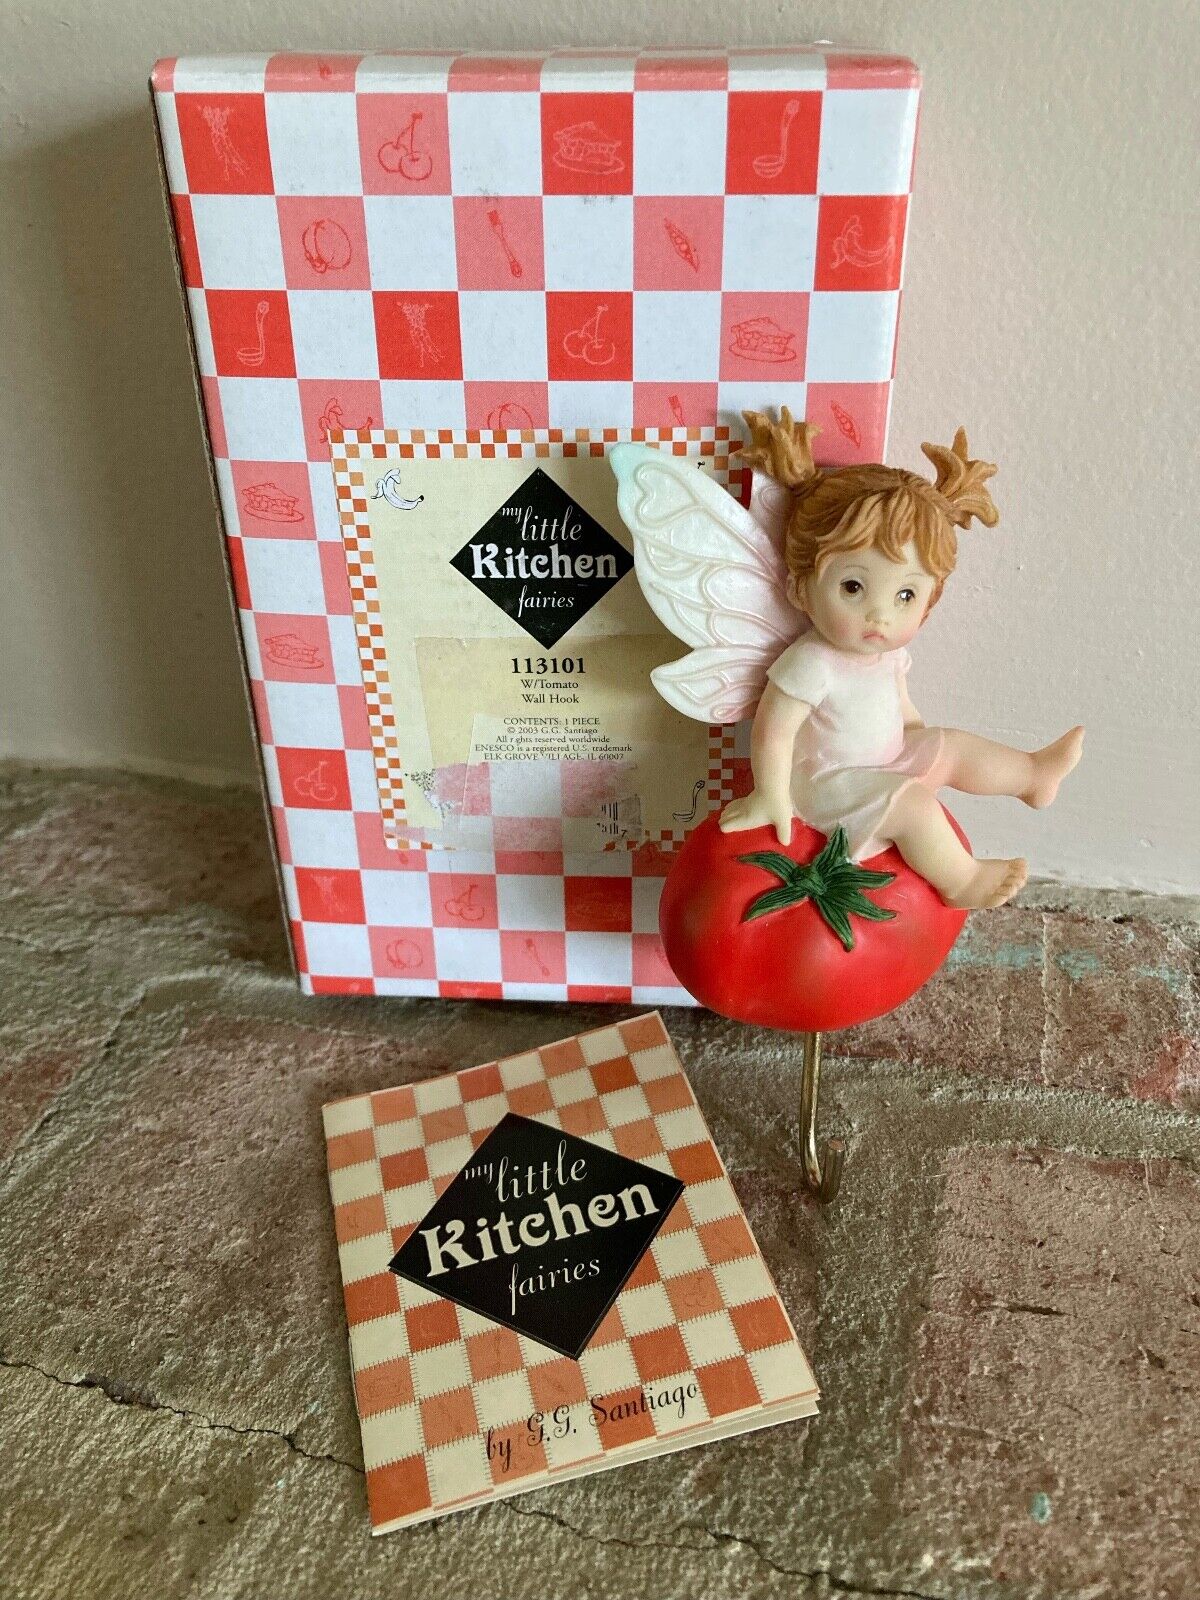 My Little Kitchen Fairies Enesco 113101 Tomato Hook New in Box from 2003